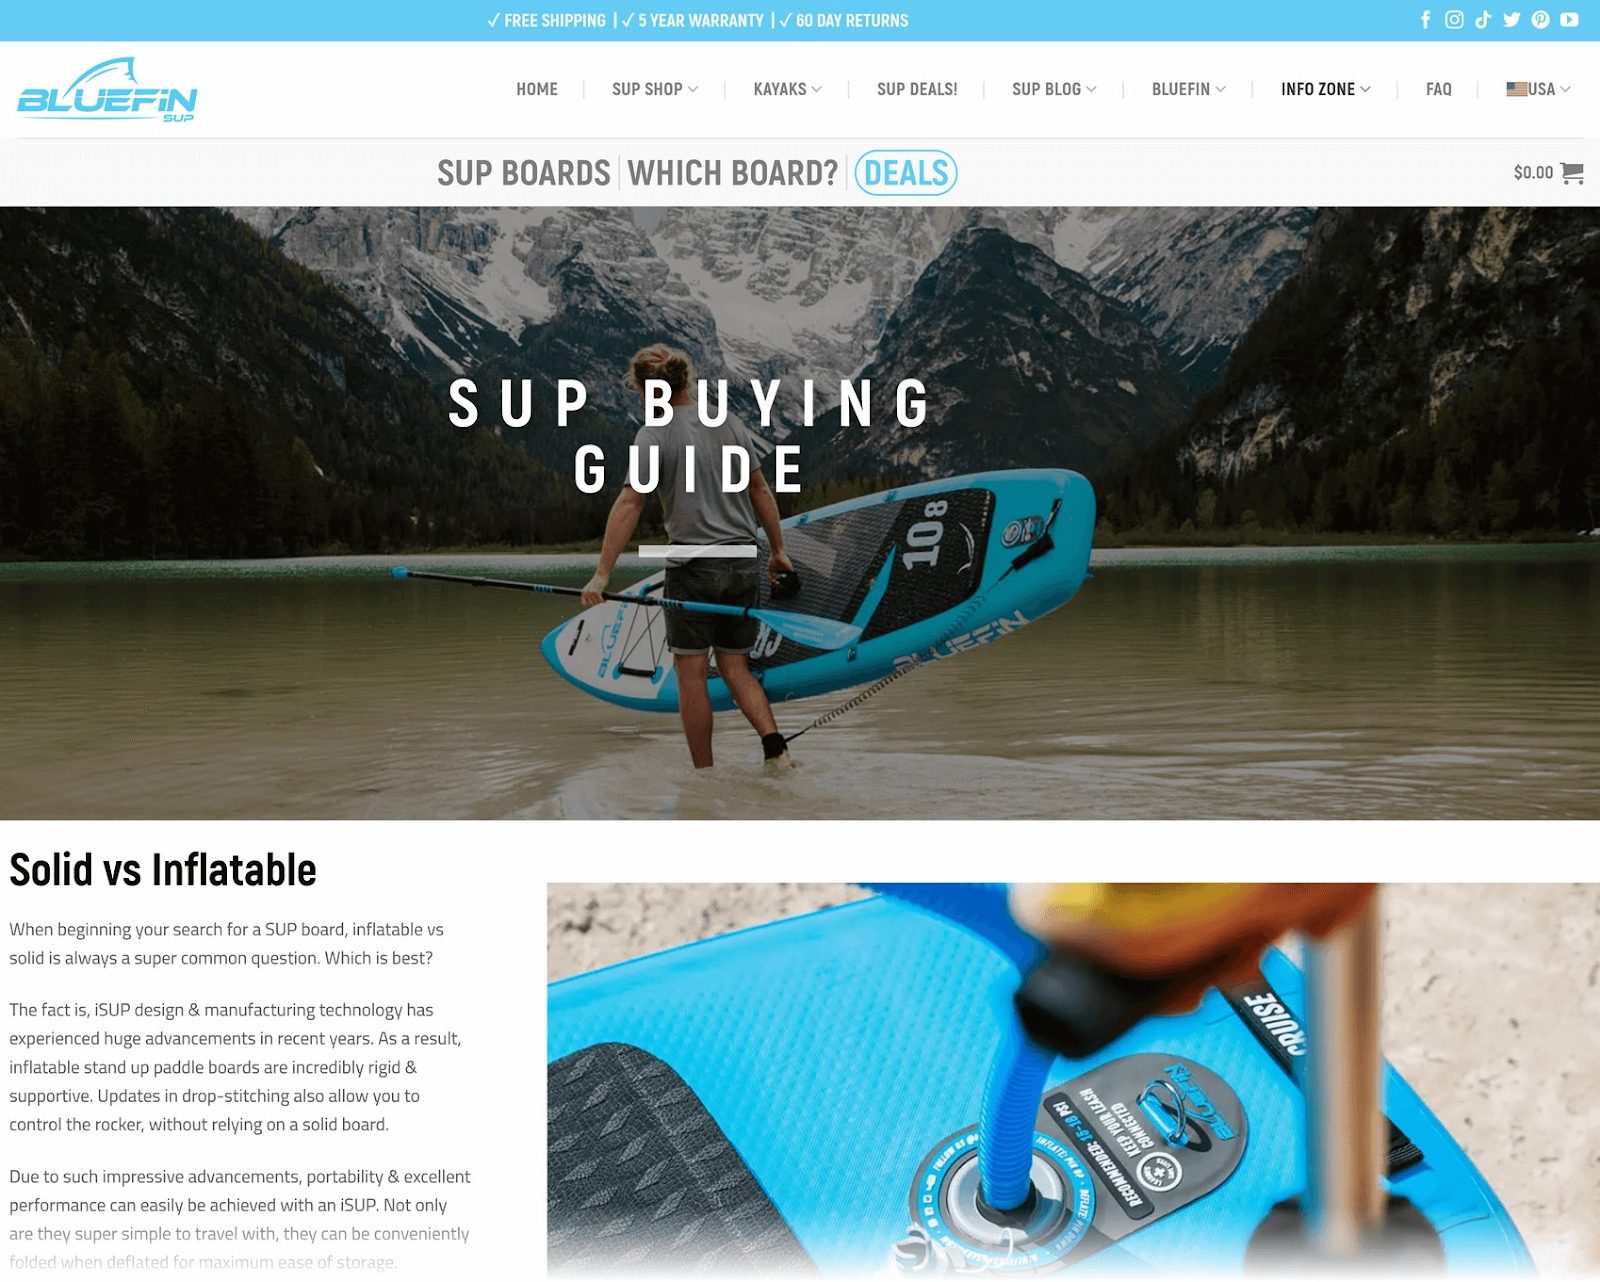 "sup buying guide" page on the Bluefin website